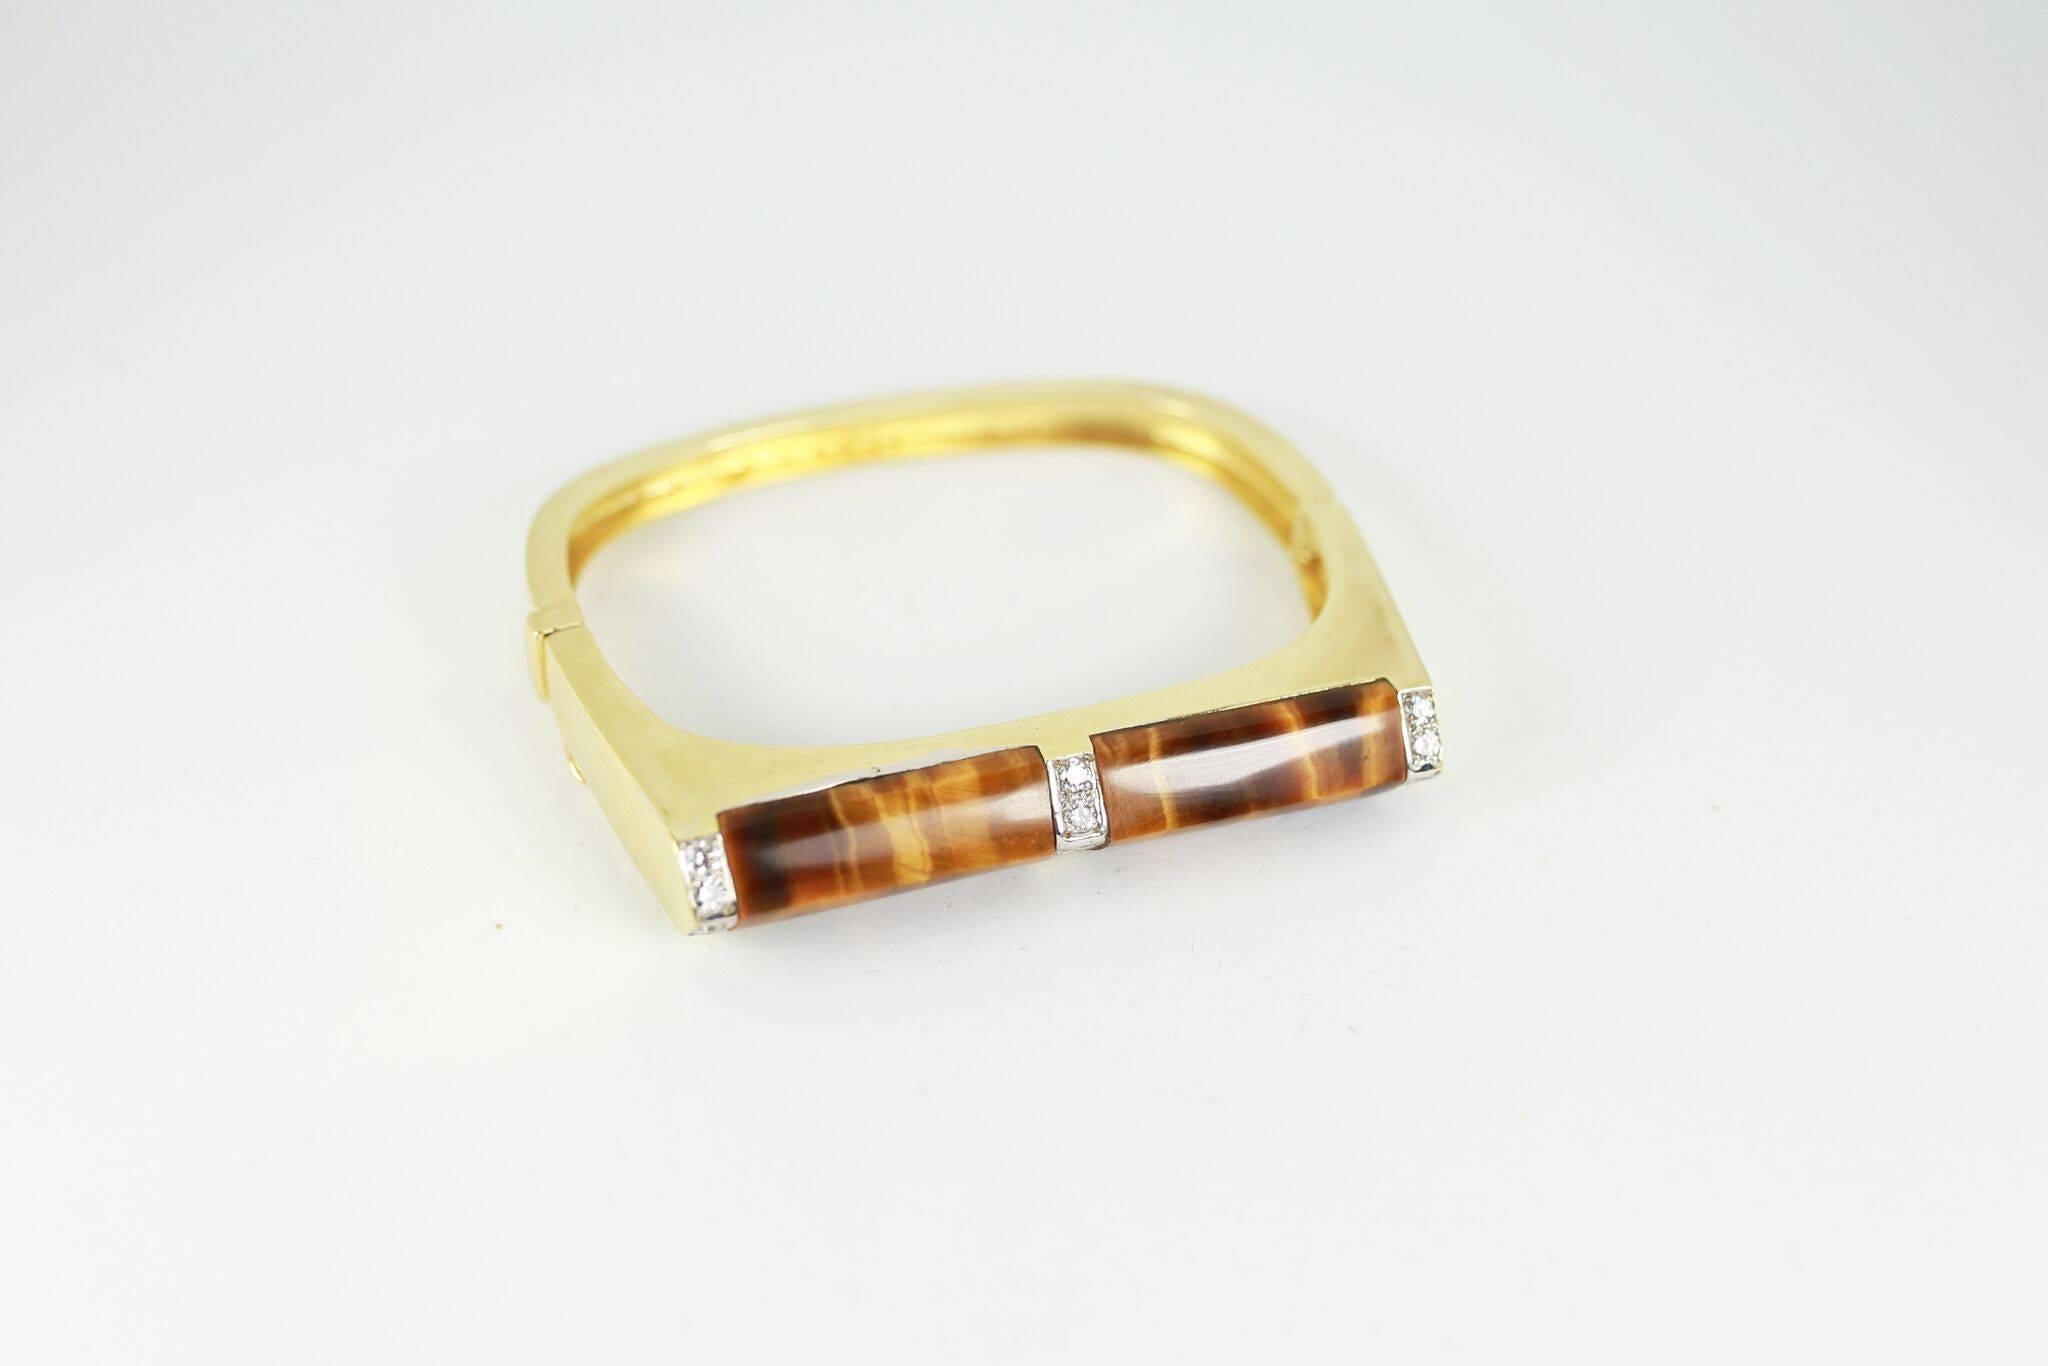 Solid 18K gold cuff inlaid with beautiful tiger's eye and framed with diamonds. Fits a small wrist.